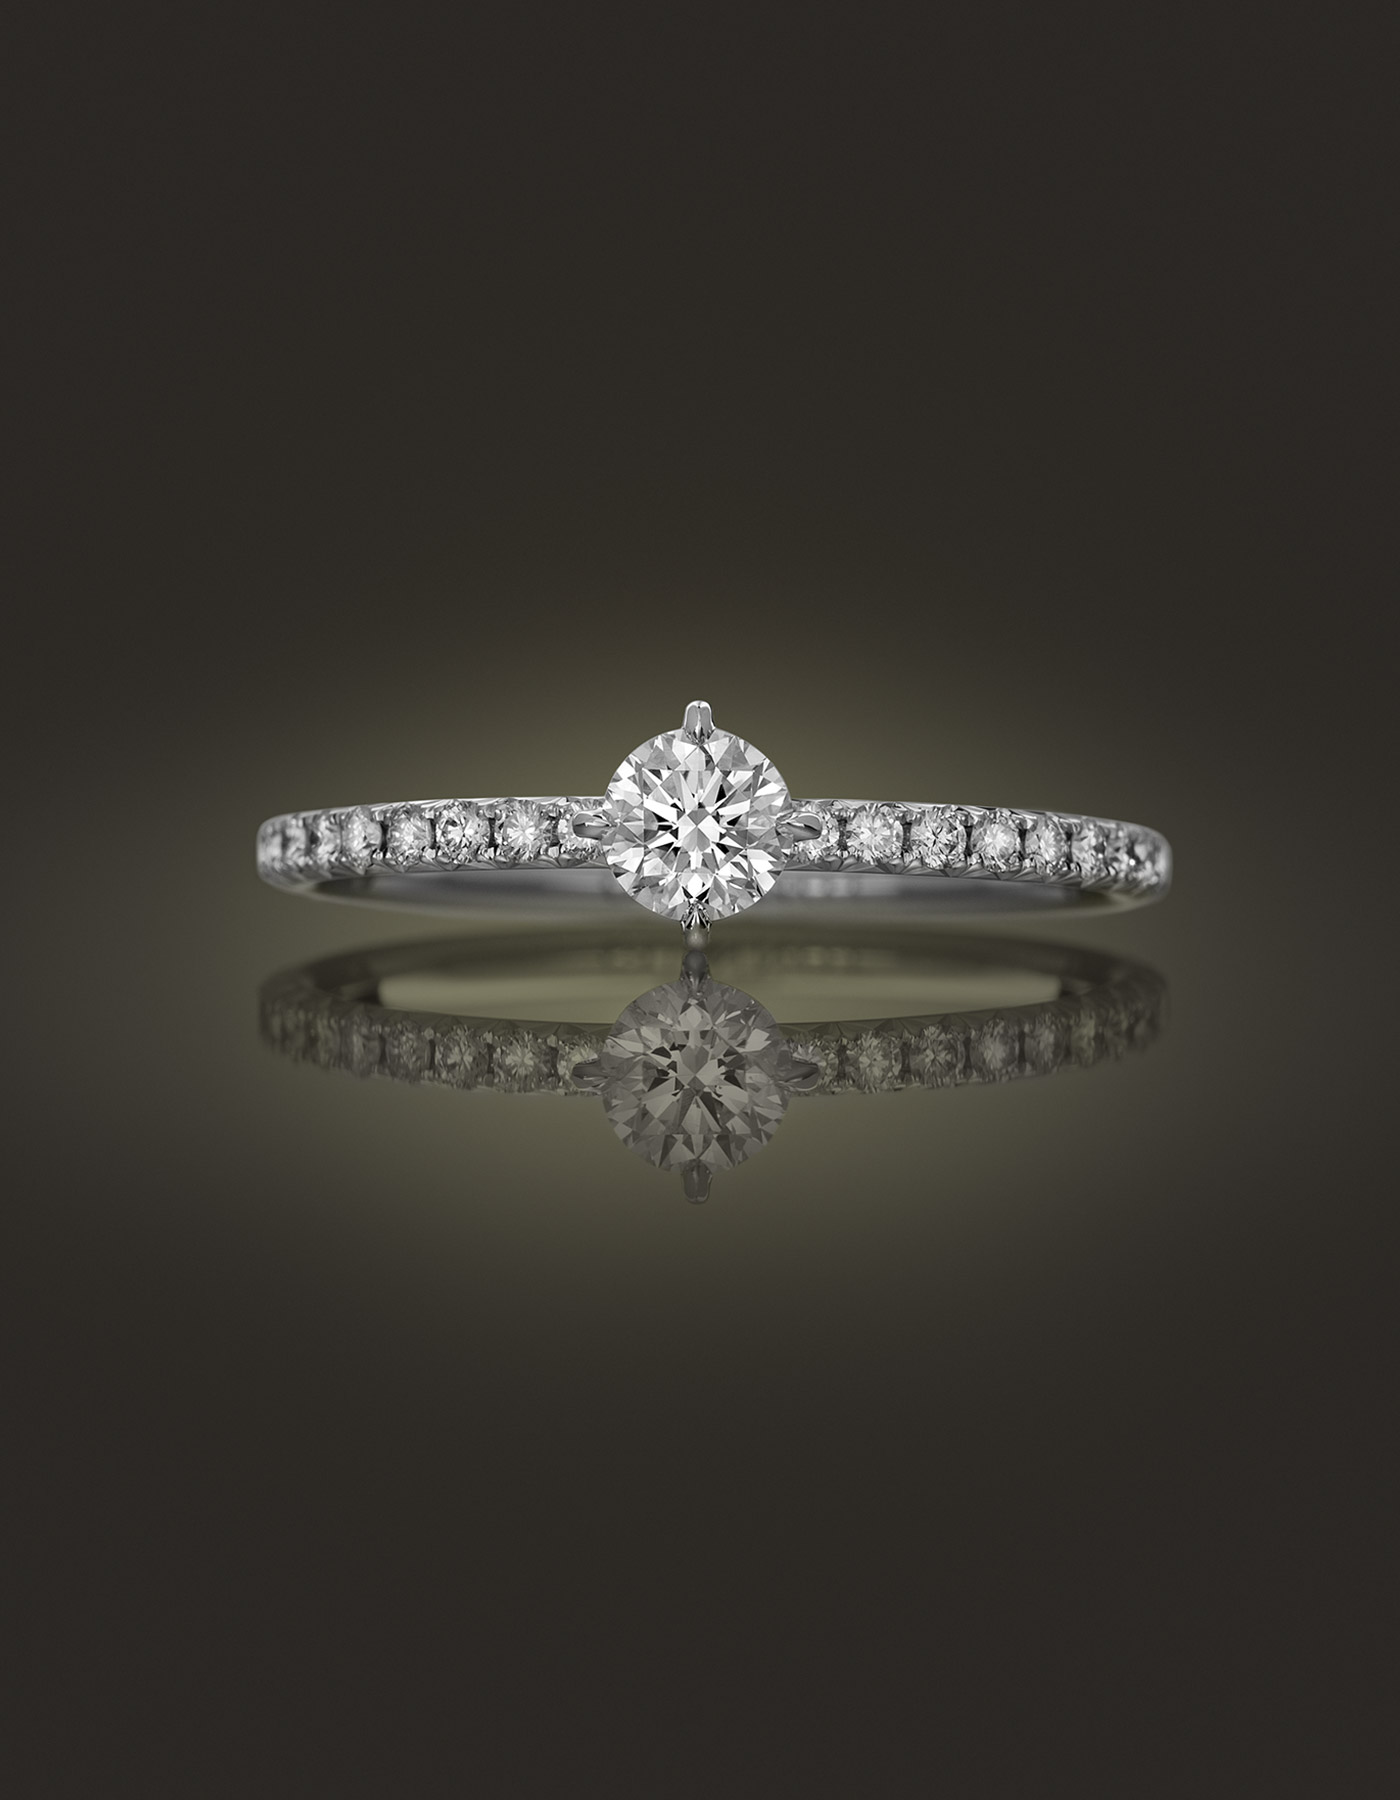 Guinnot Anonymous Solitaire diamond ring in 18k white gold